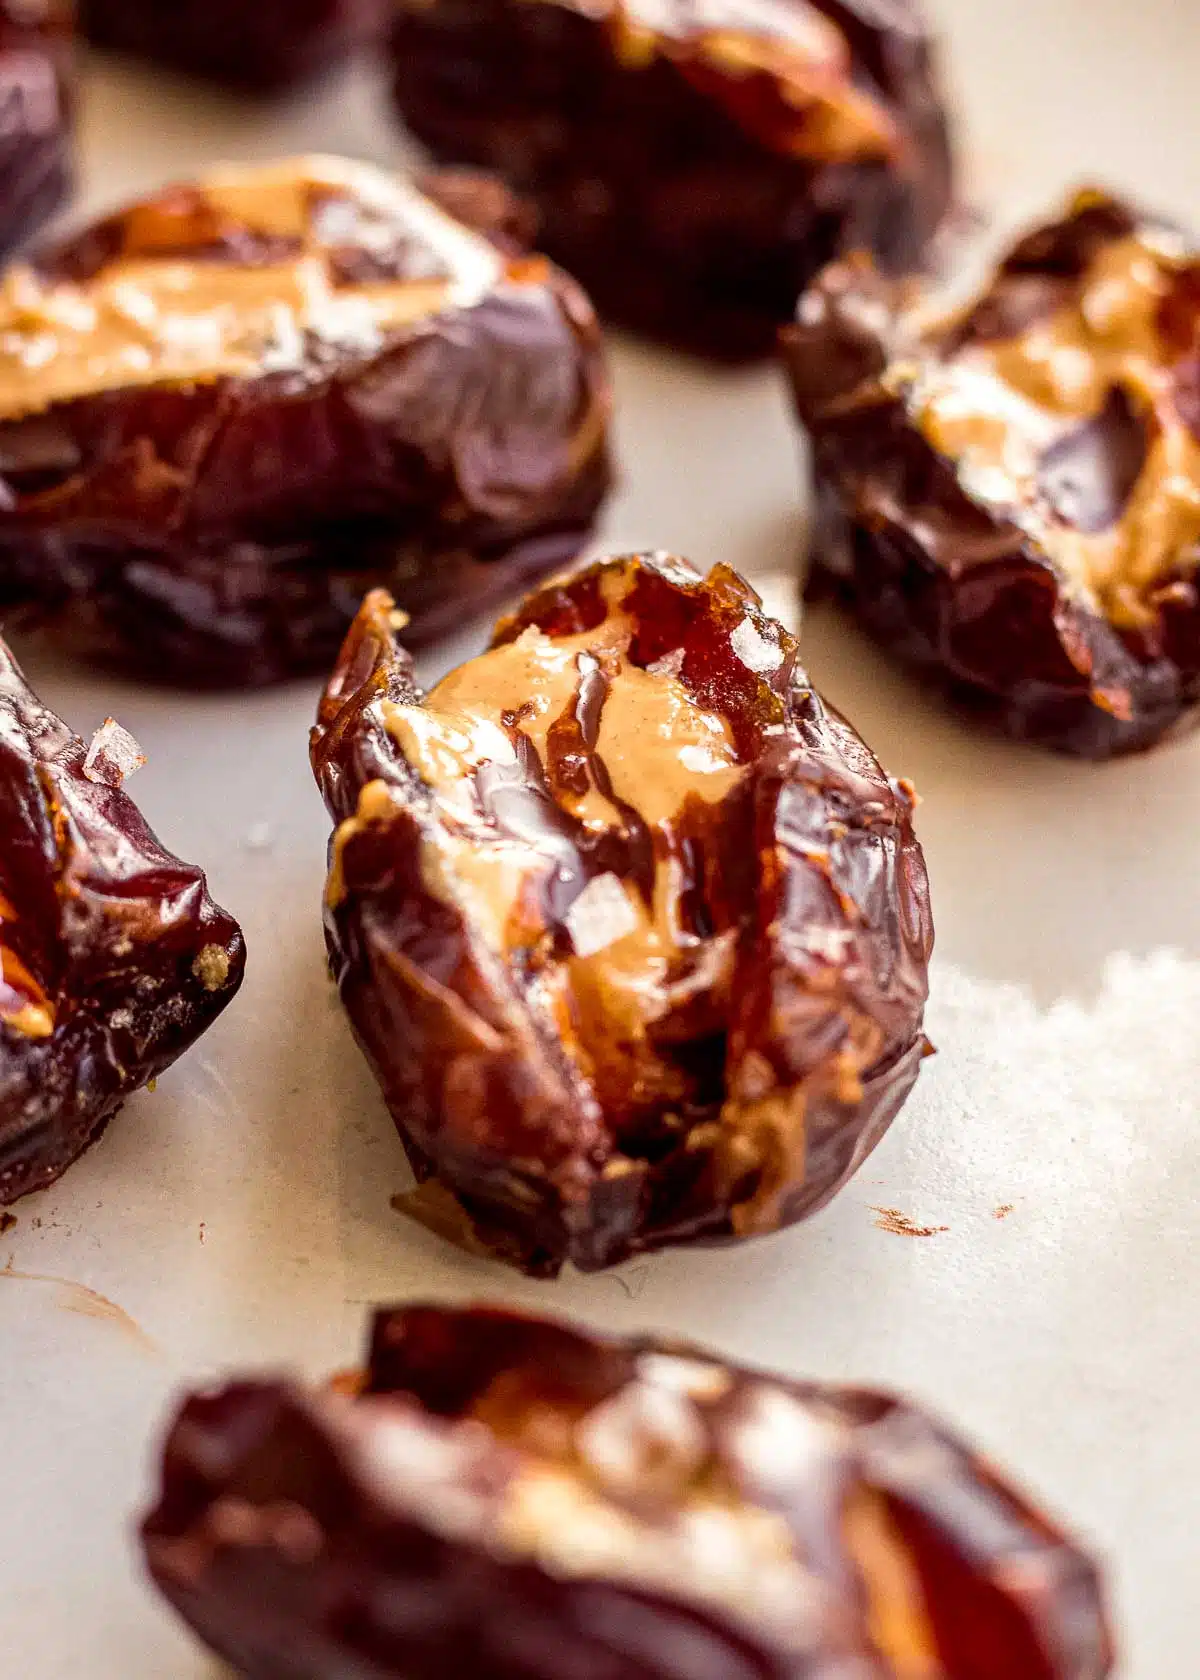 Dates halves and filled with peanut butter, covered in chocolate.